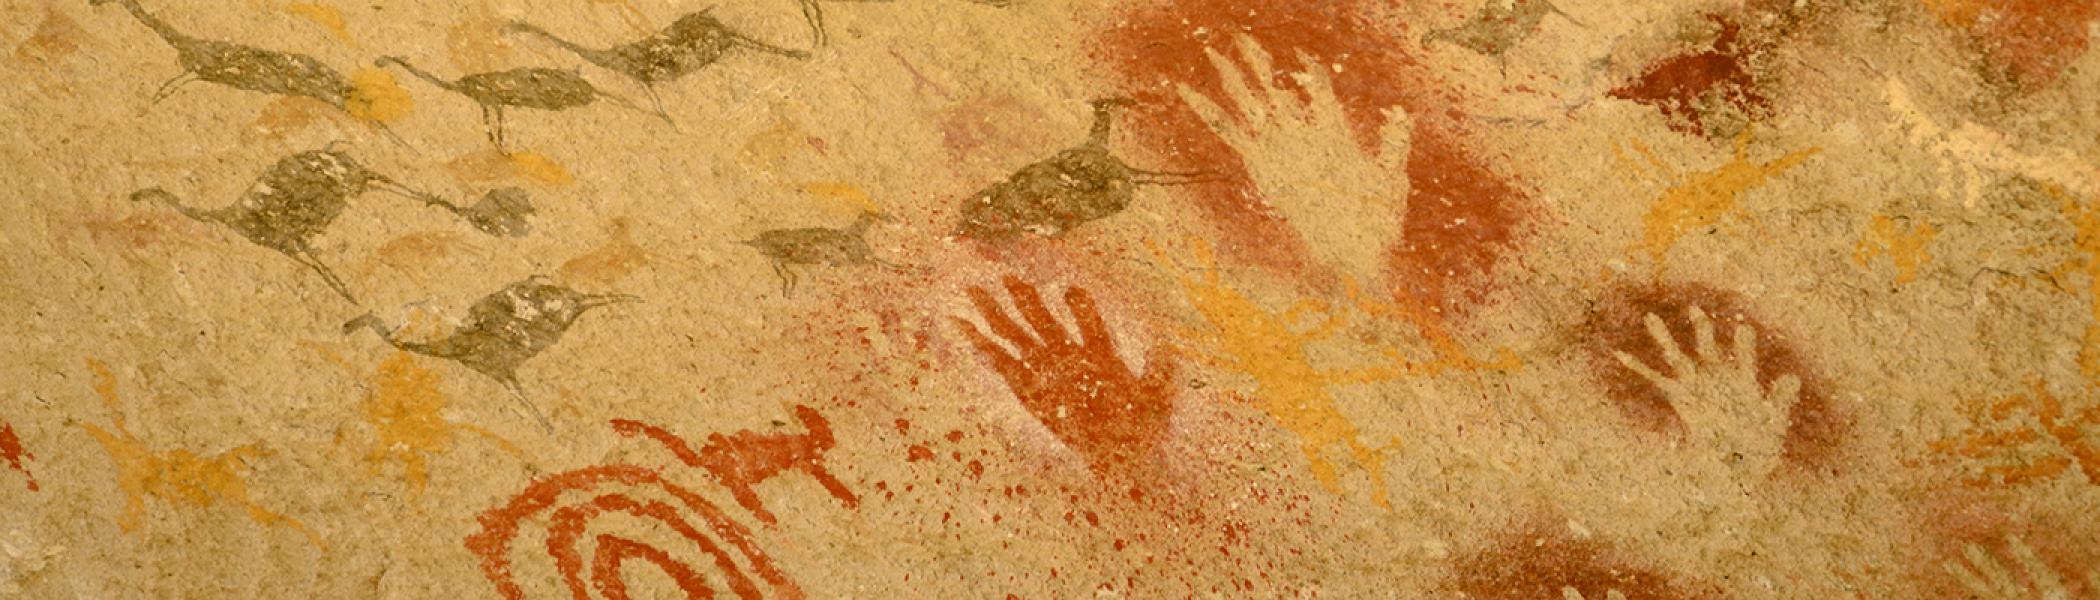 Native pictograph of handprints and deer